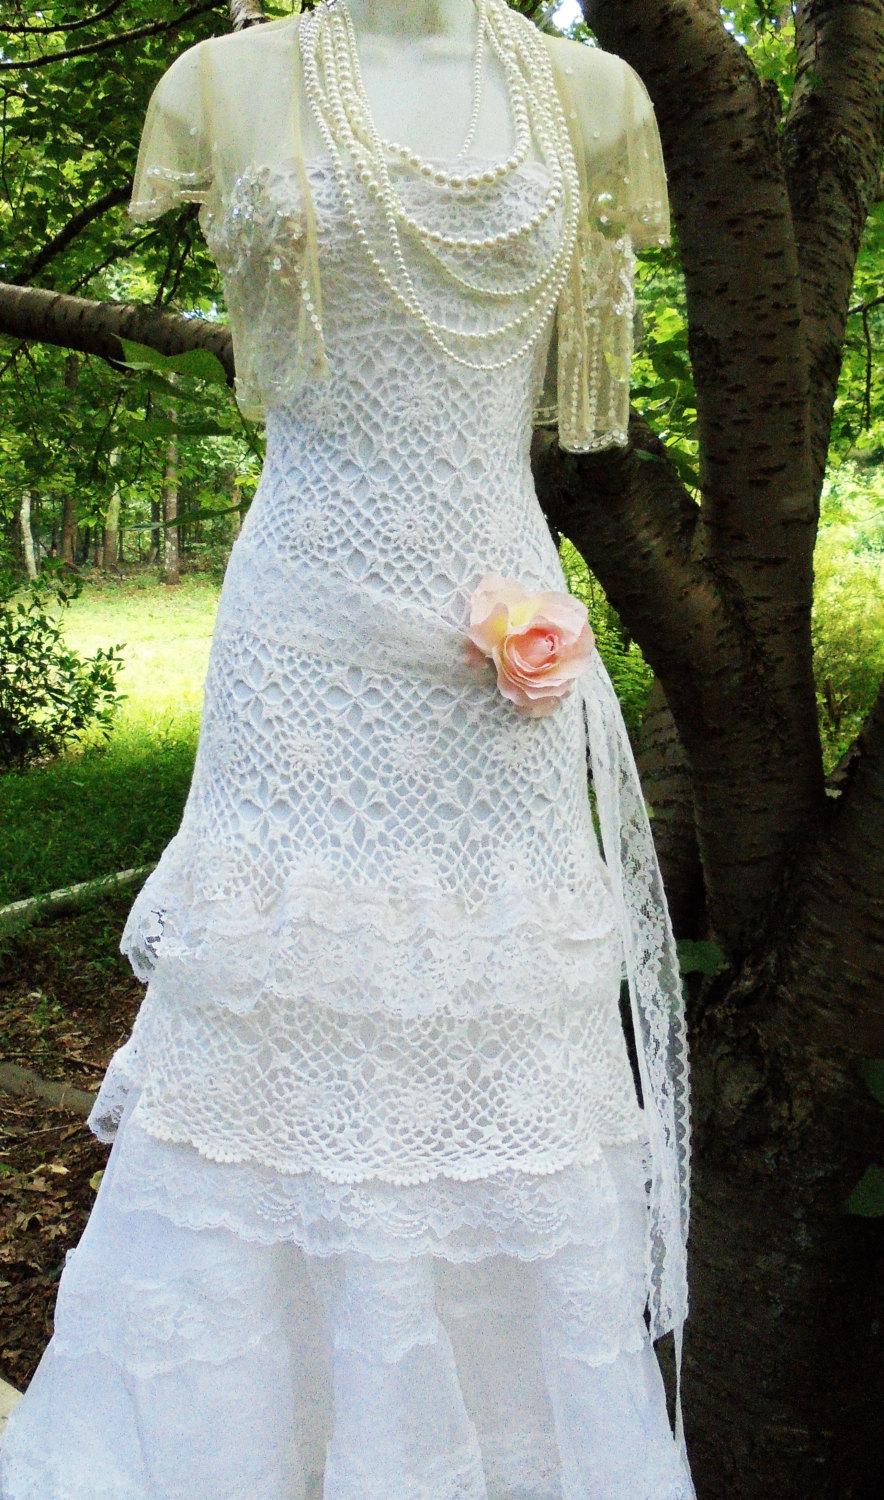 Hochzeit - Crochet lace dress wedding white ivory strapless lace tulle tiered boho  vintage  bride outdoor  romantic medium by vintage opulence on Etsy